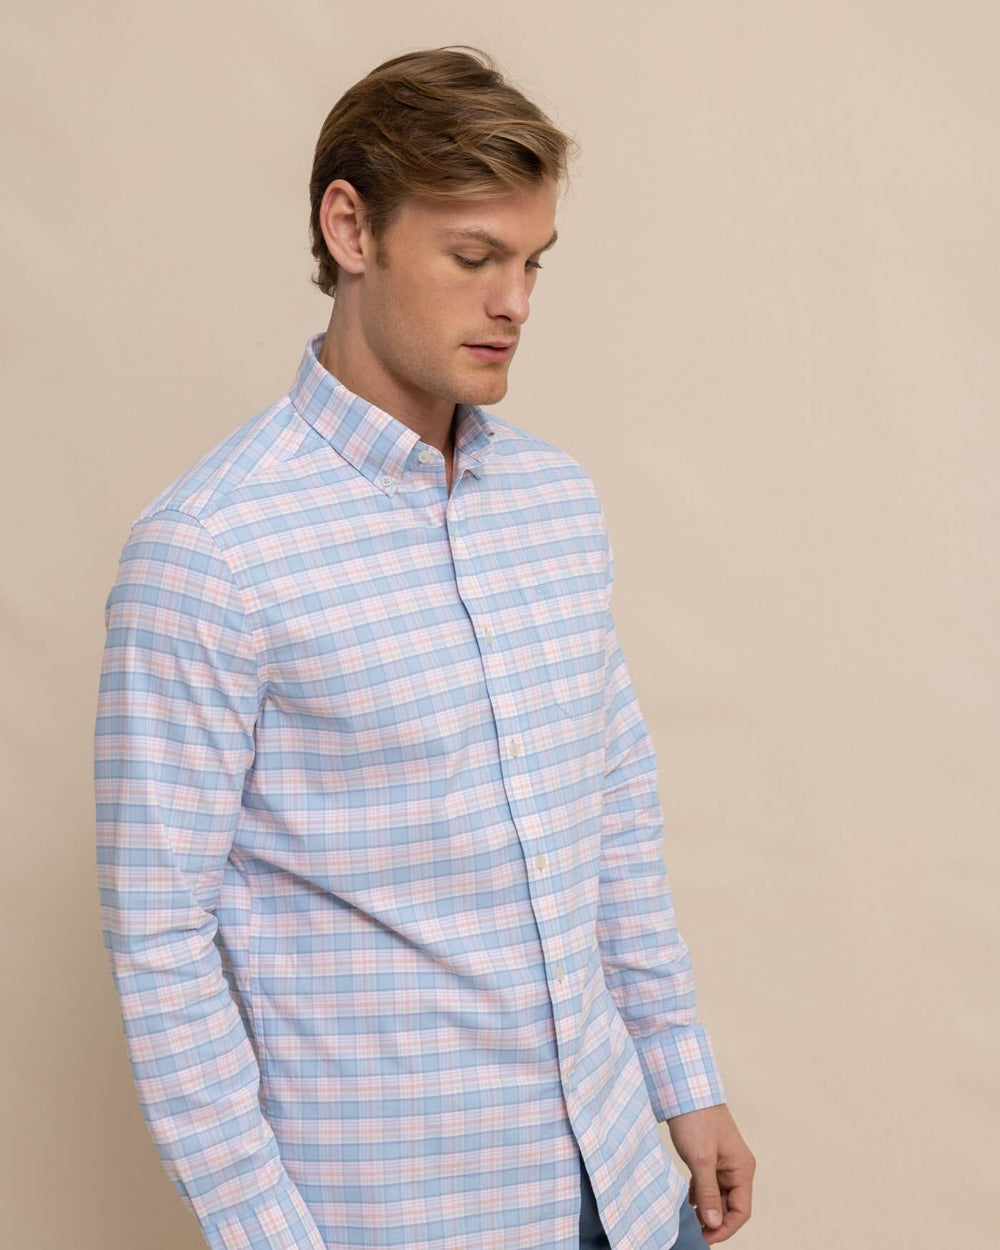 The front view of the Southern Tide Coastal Passage Brockman Plaid Long Sleeve SportShirt by Southern Tide - Clearwater Blue